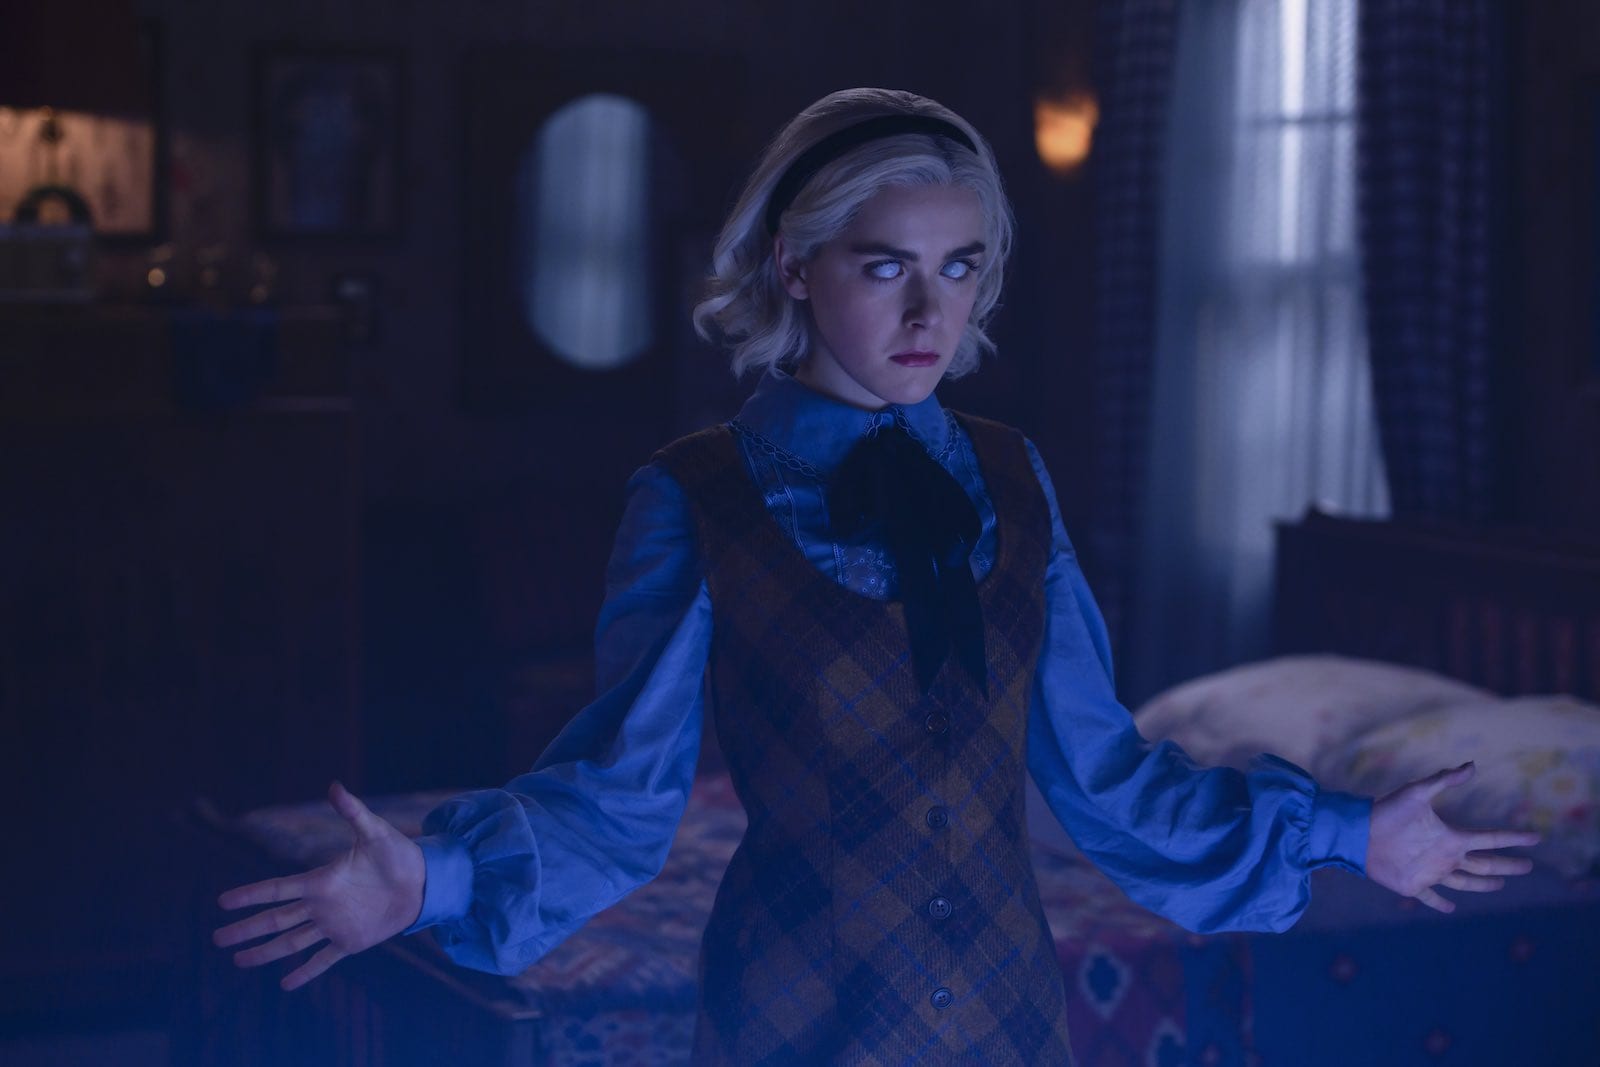 Escape to the Archieverse with our 'Chilling Adventures of Sabrina' quiz. Dance with the devil, cast your spells, and take our quiz!